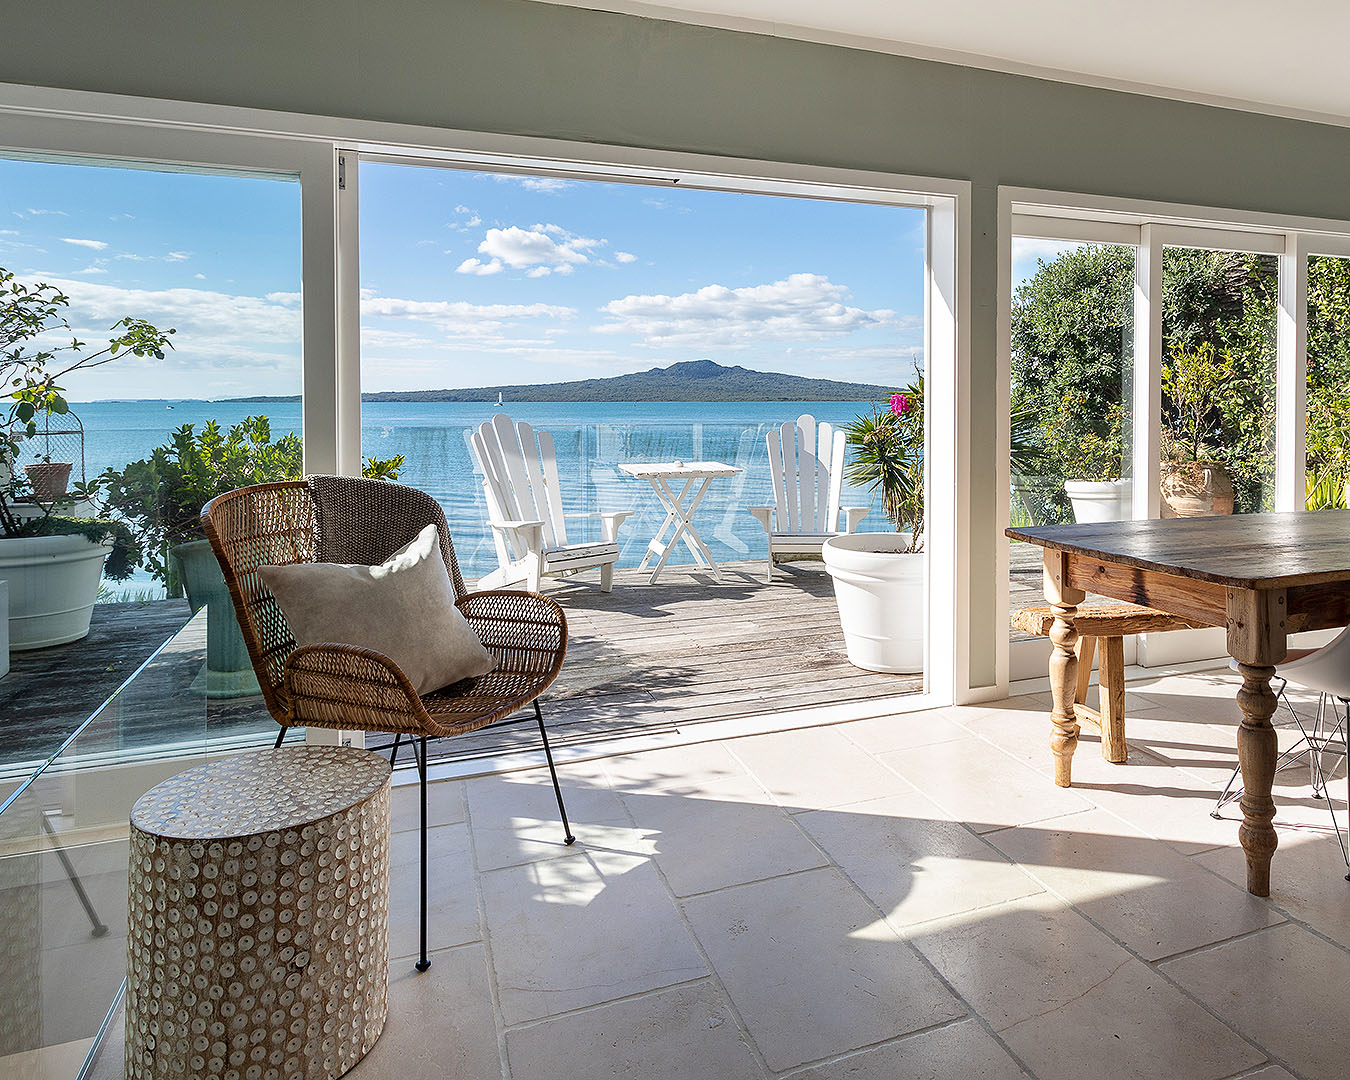 A well appointed room looks out onto a sunny deck with Rangitoto in the distance.